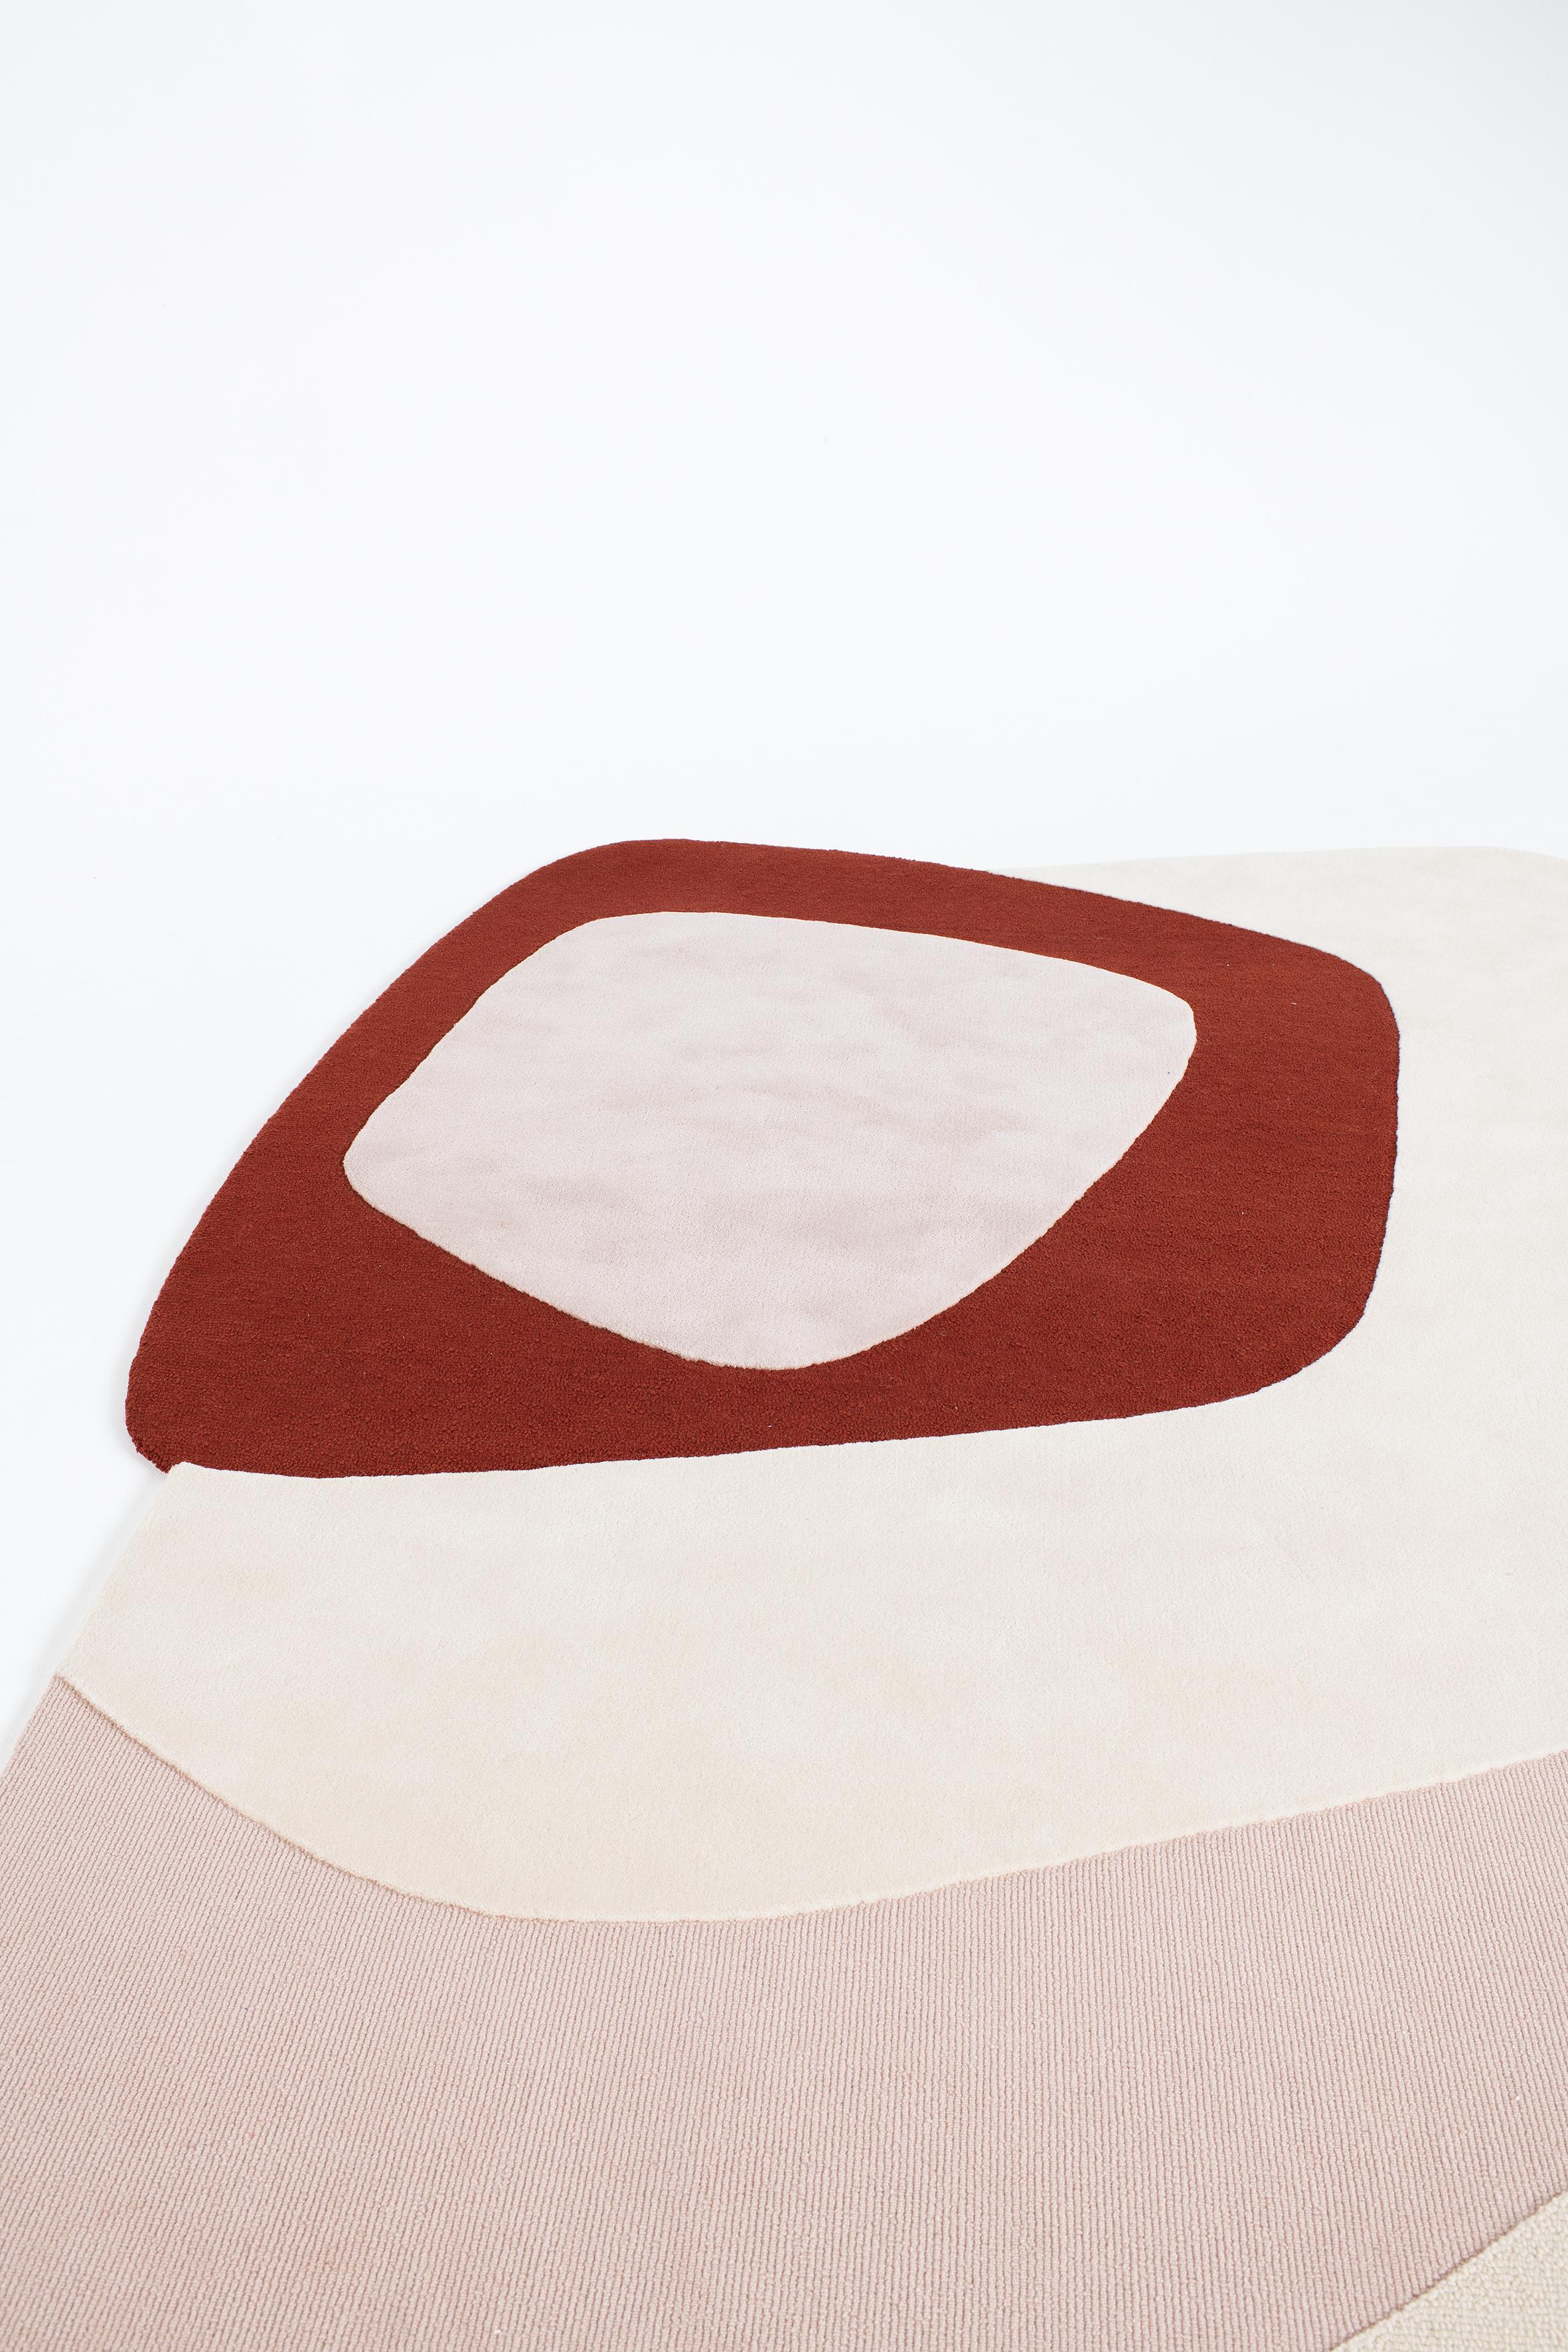 Selman rug, wool New Zealand, hand-tufted,  France, Le Berre Vevaud
Empreinte Collection
100% wool from New Zealand
Hand-tufted

For their second collection, Raphaël Le Berre and Thomas Vevaud highlight the 